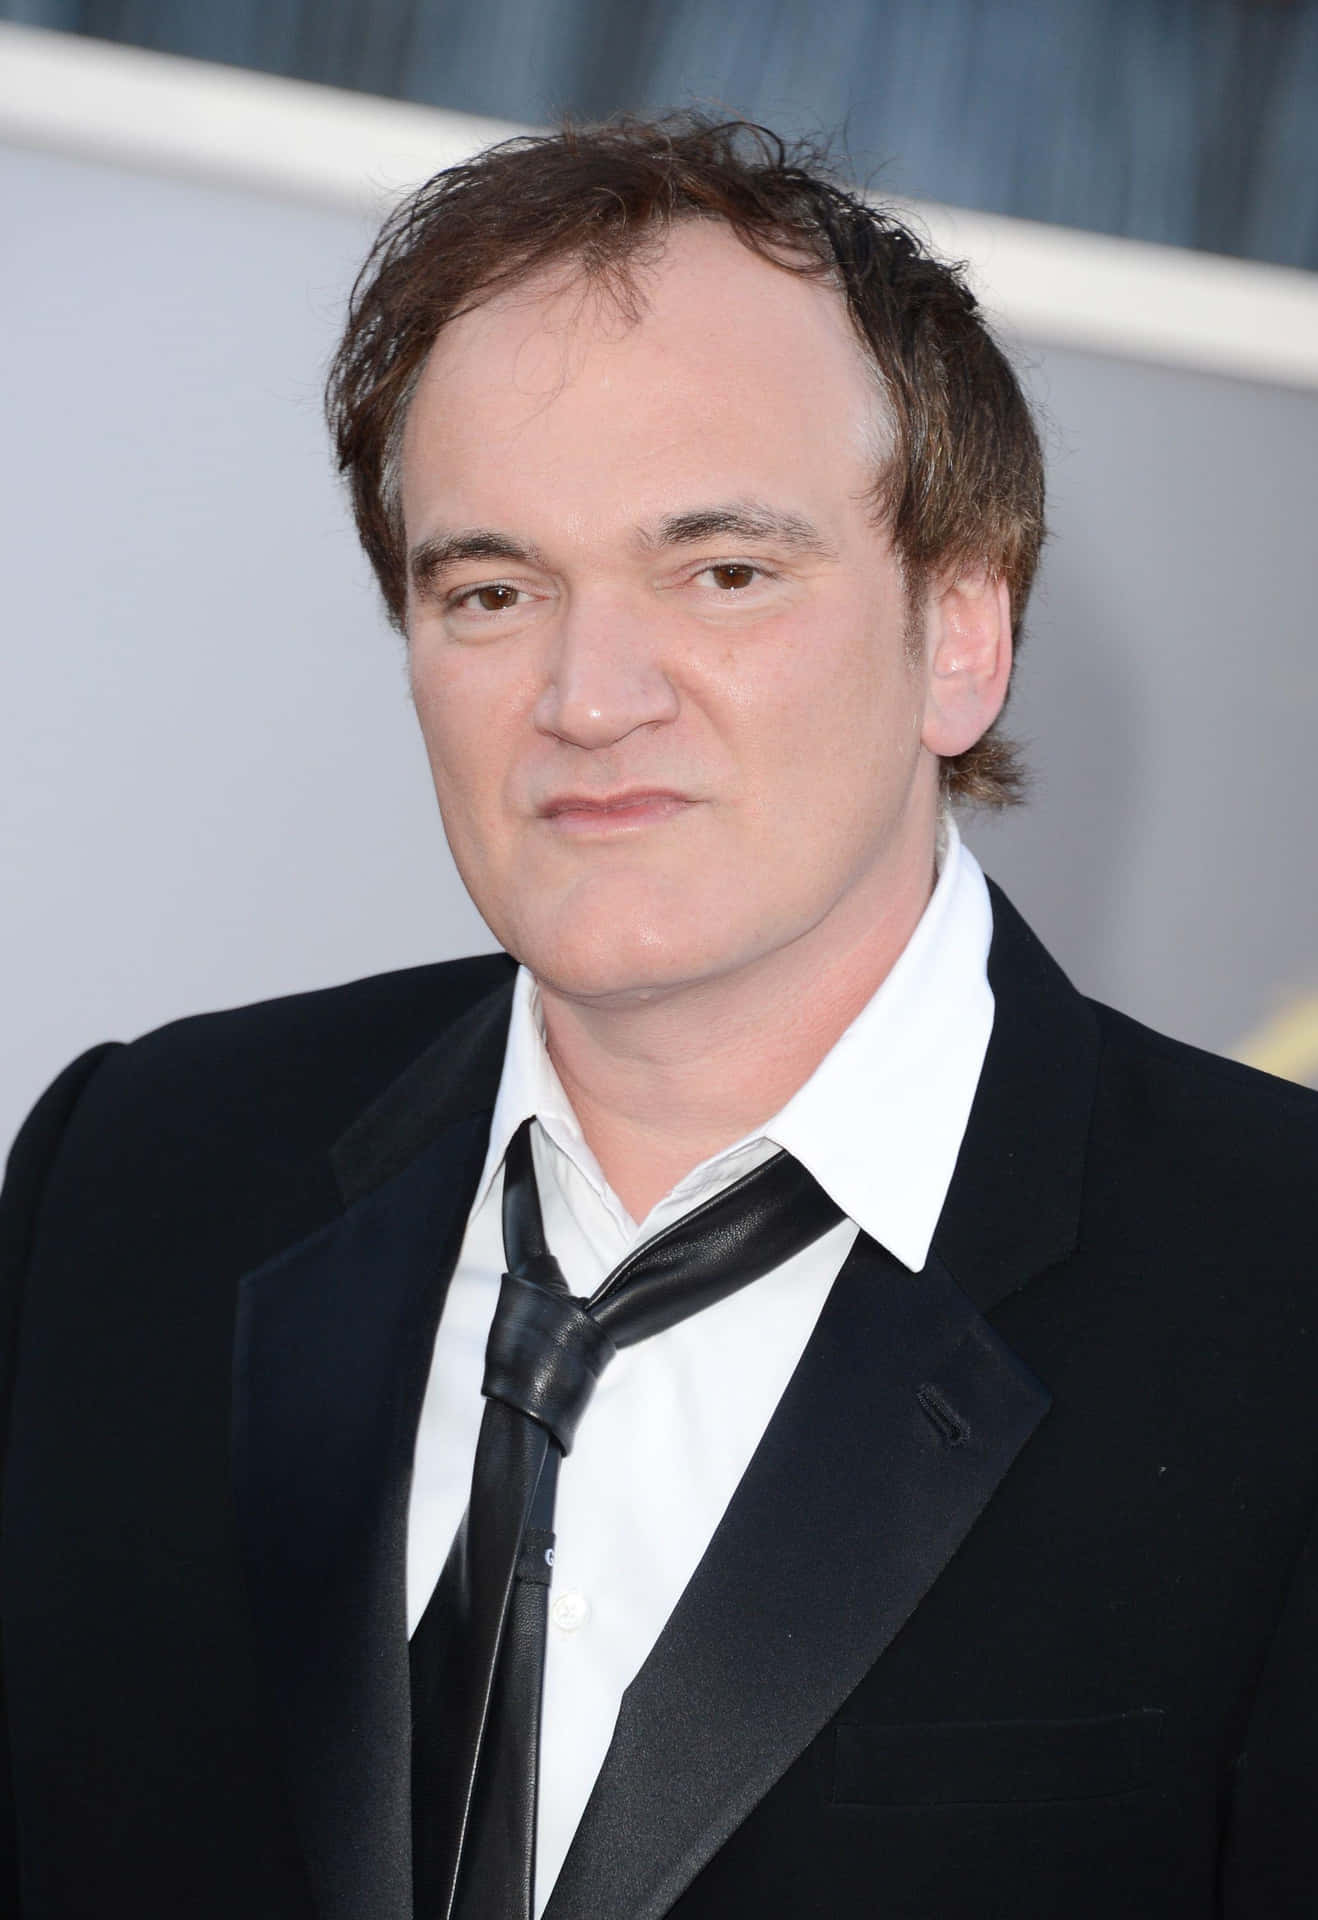 Quentin Tarantino Red Carpet Appearance Background